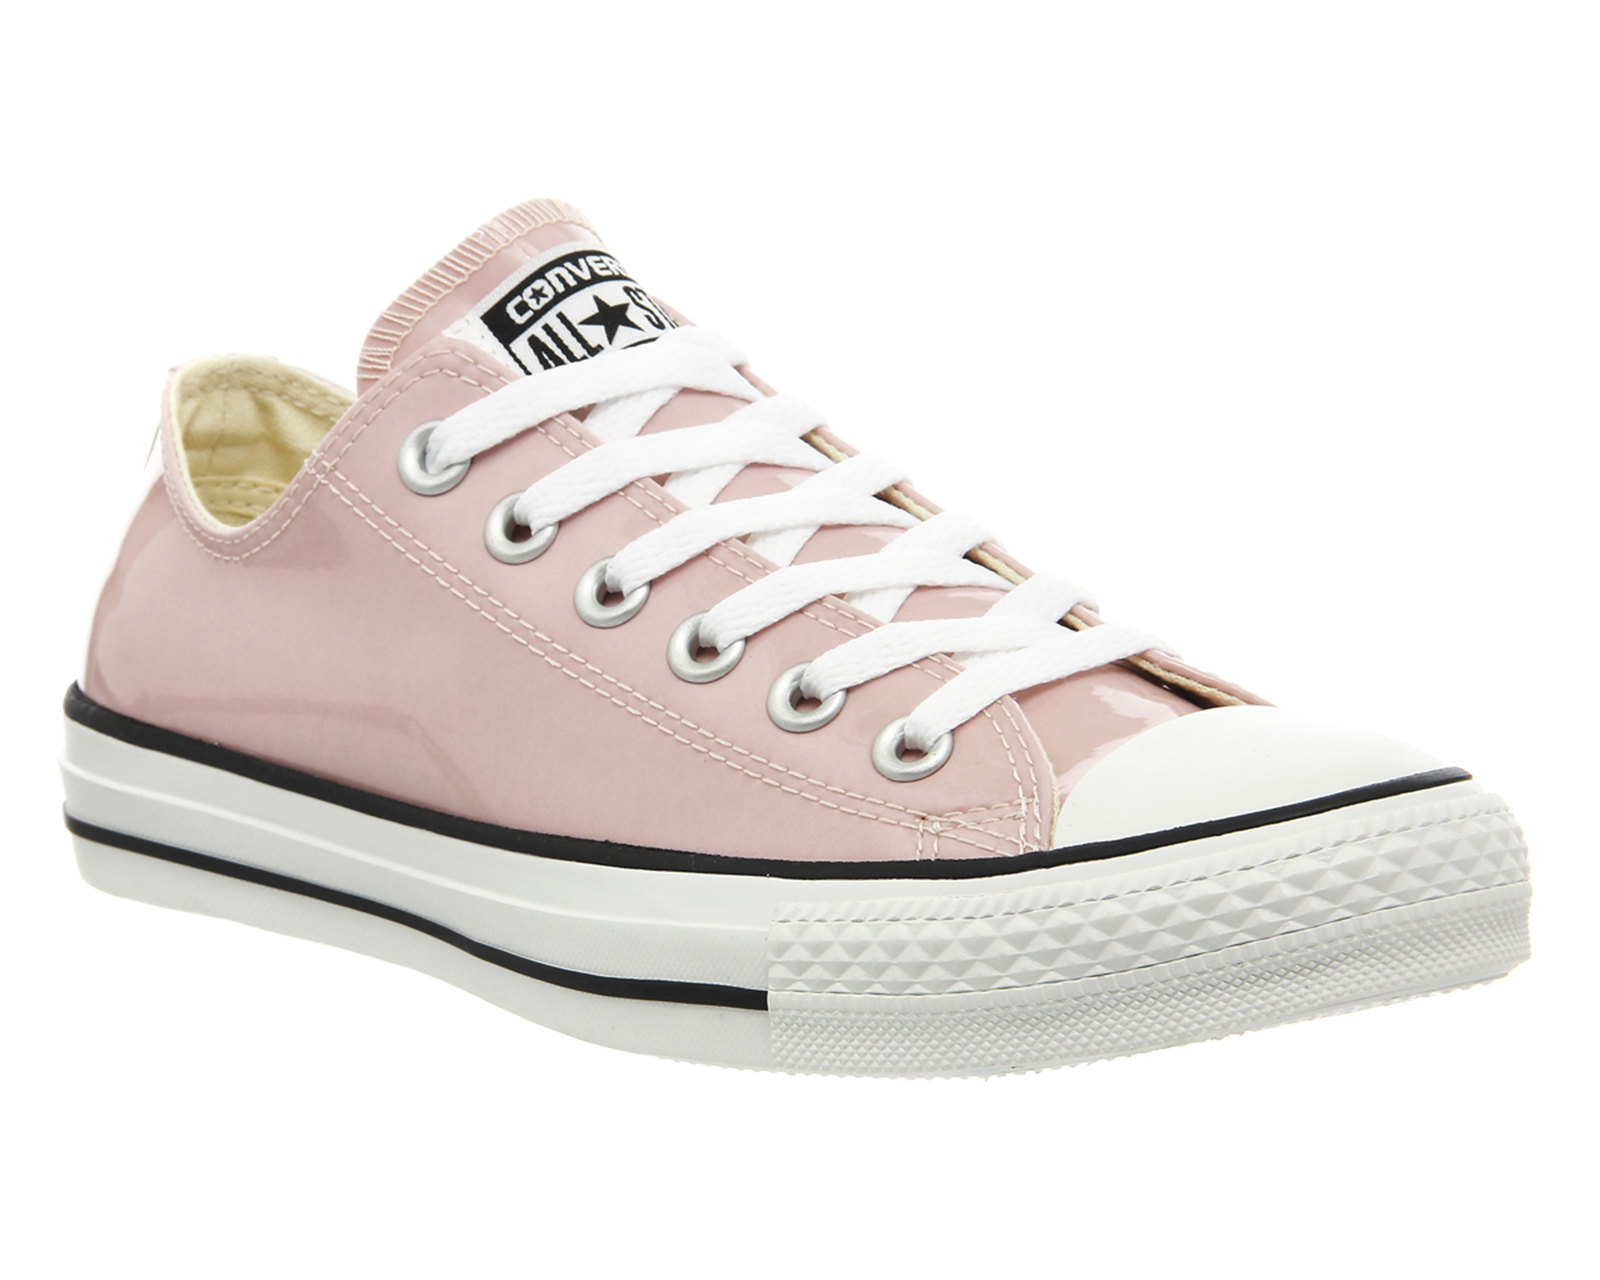 Converse All Star Low Rose Pastel Patent Exclusive - Women's Trainers